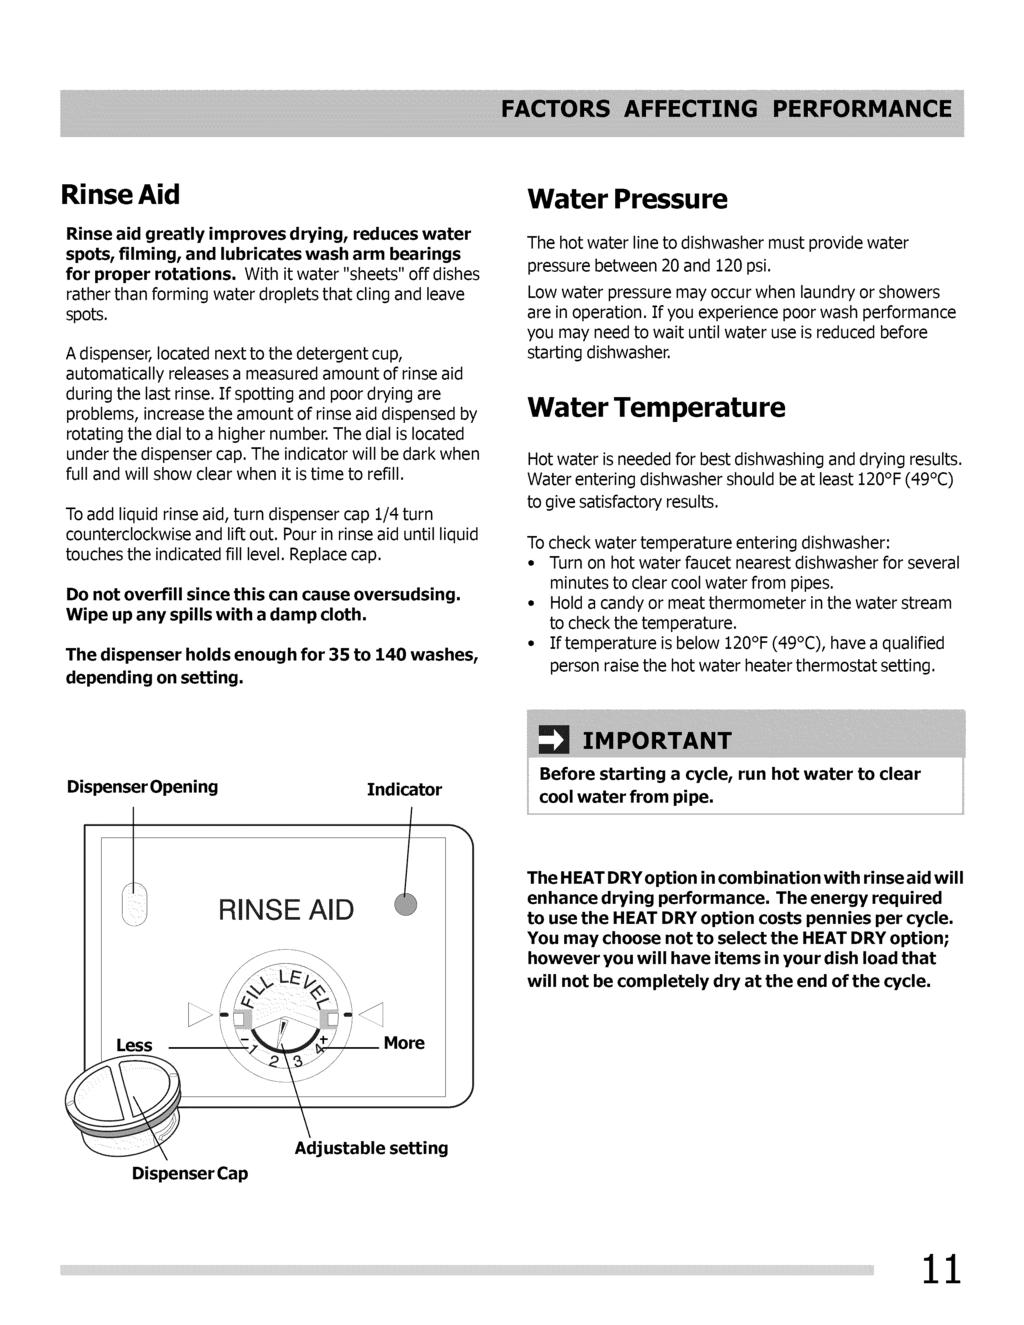 Rinse Aid Water Pressure Rinse aid greatly improves drying, reduces water spots, filming, and lubricates wash arm bearings for proper rotations.